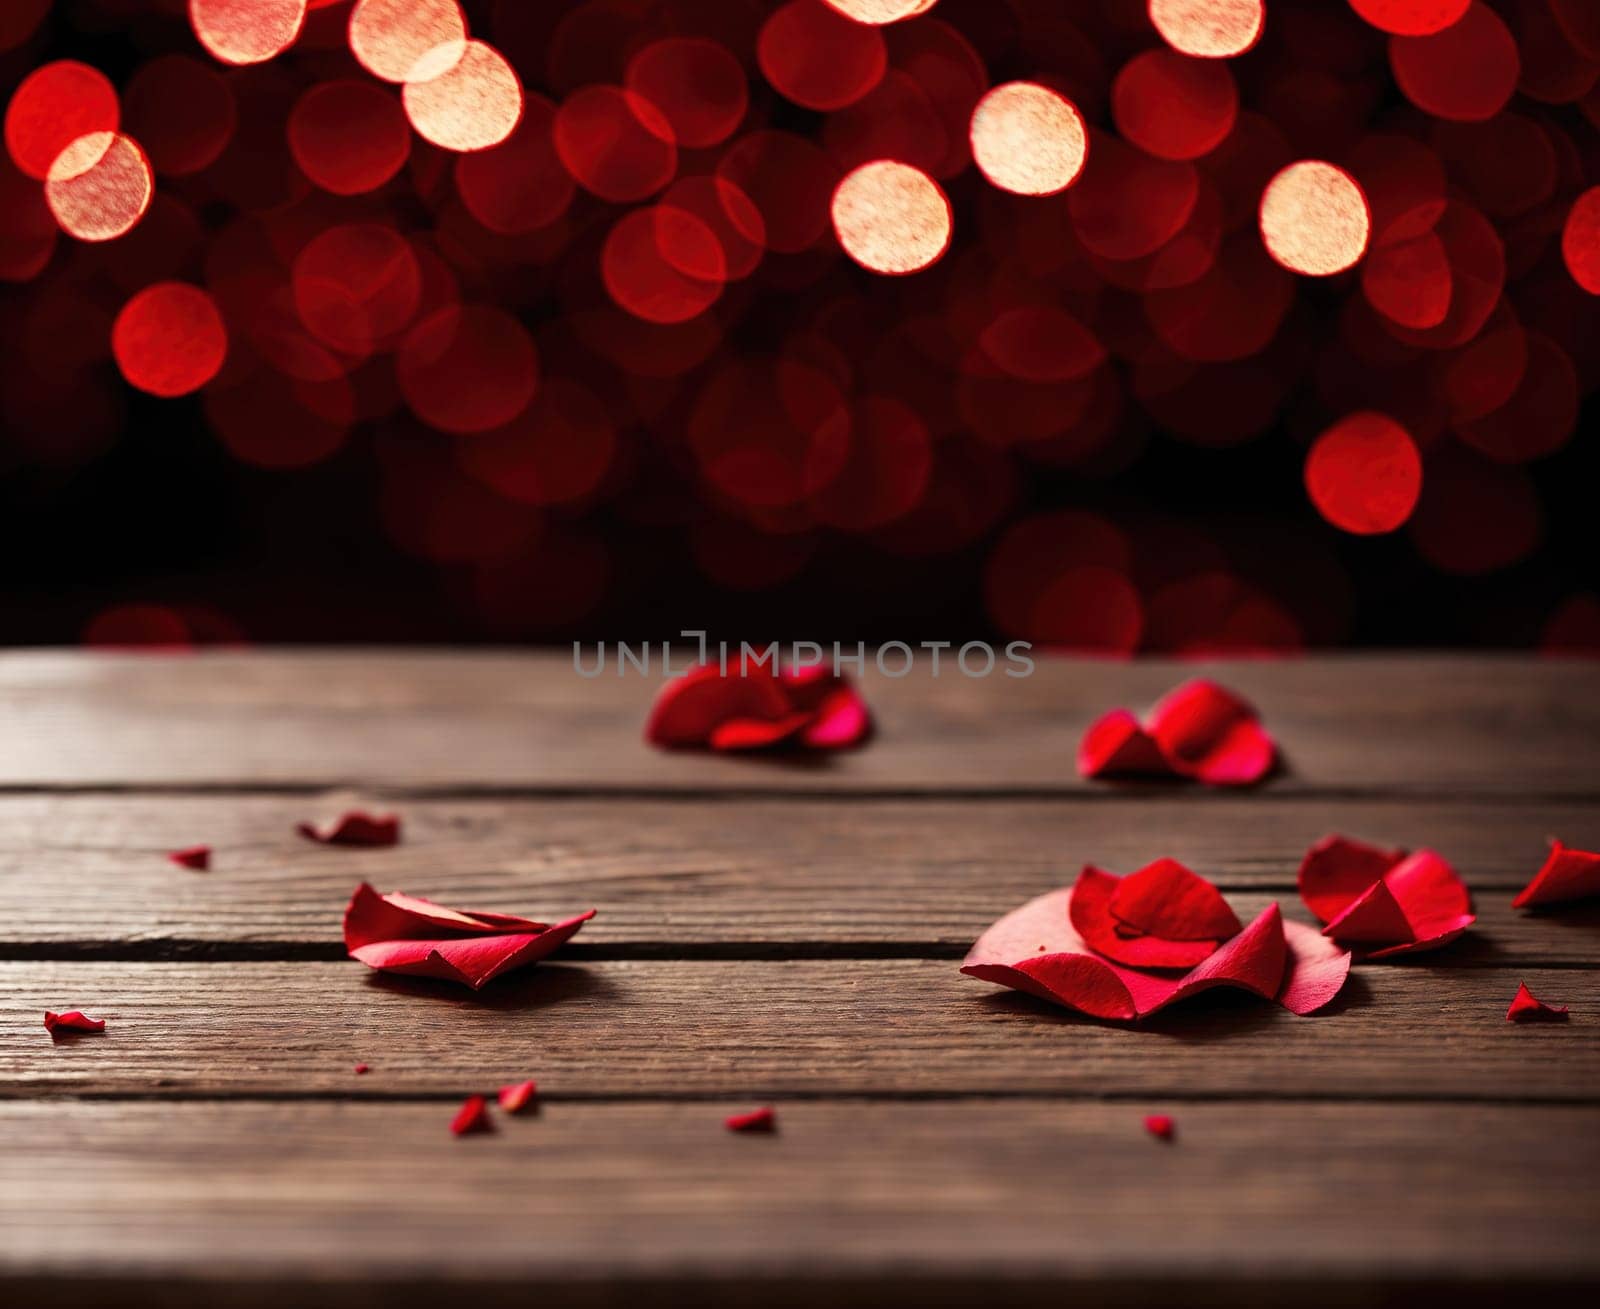 The image shows a red rose petal on a wooden table with a blurred background of Christmas lights.